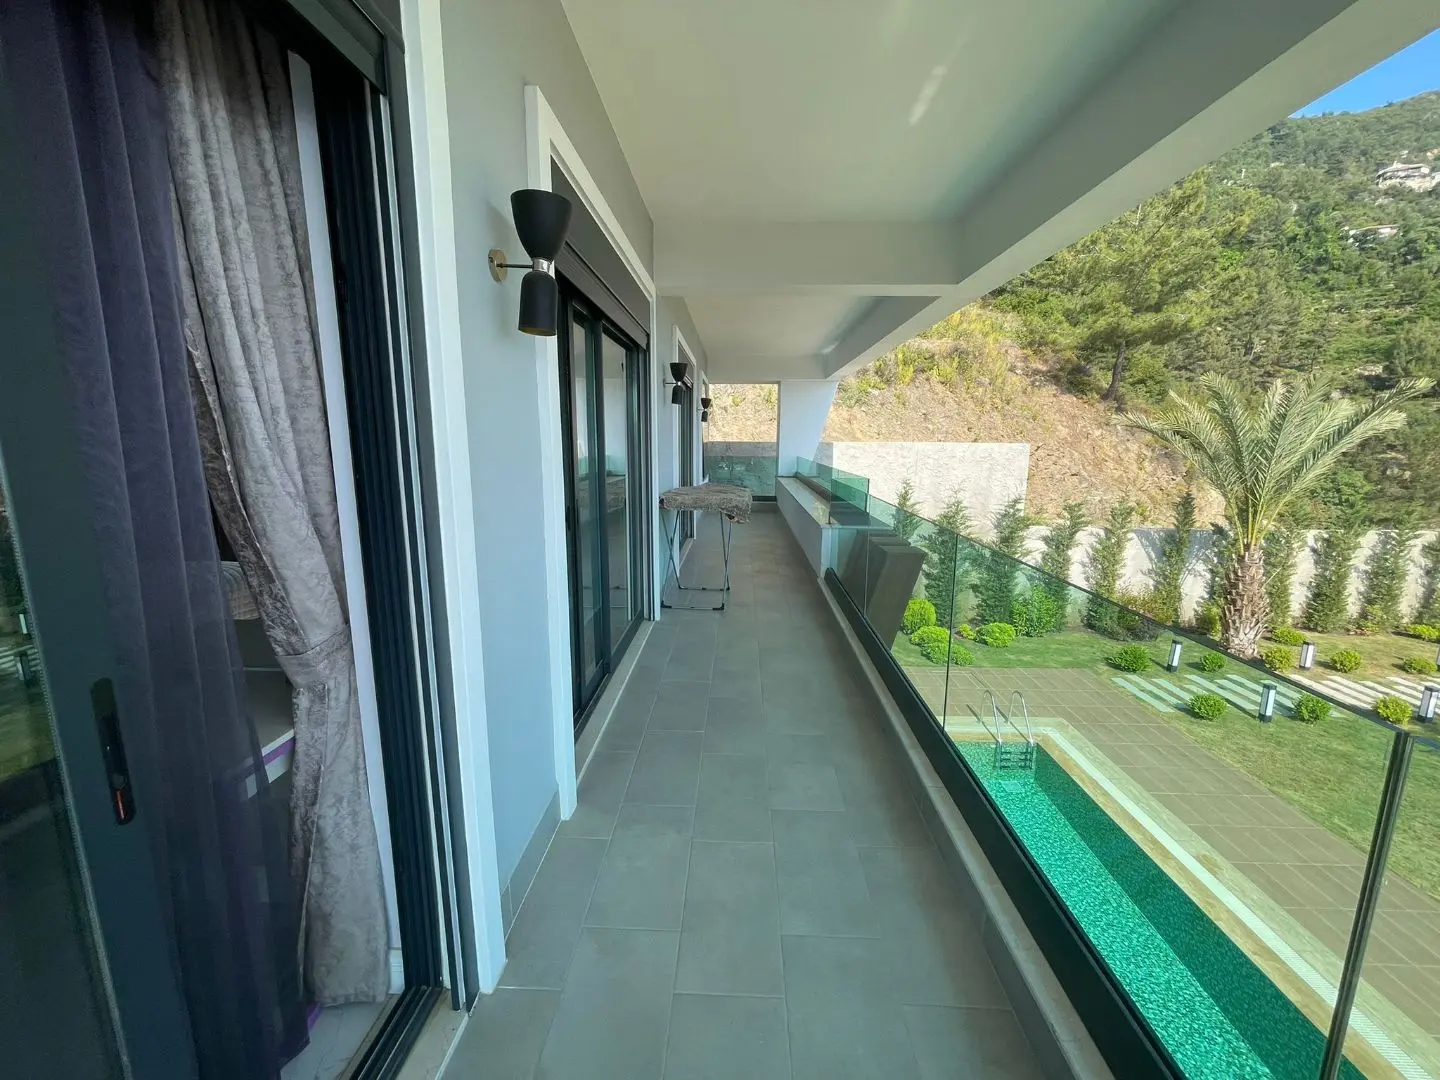 LUXURIOUS VILLA WITH EXCELLENT VIEW IN ALANYA BEKTAŞ